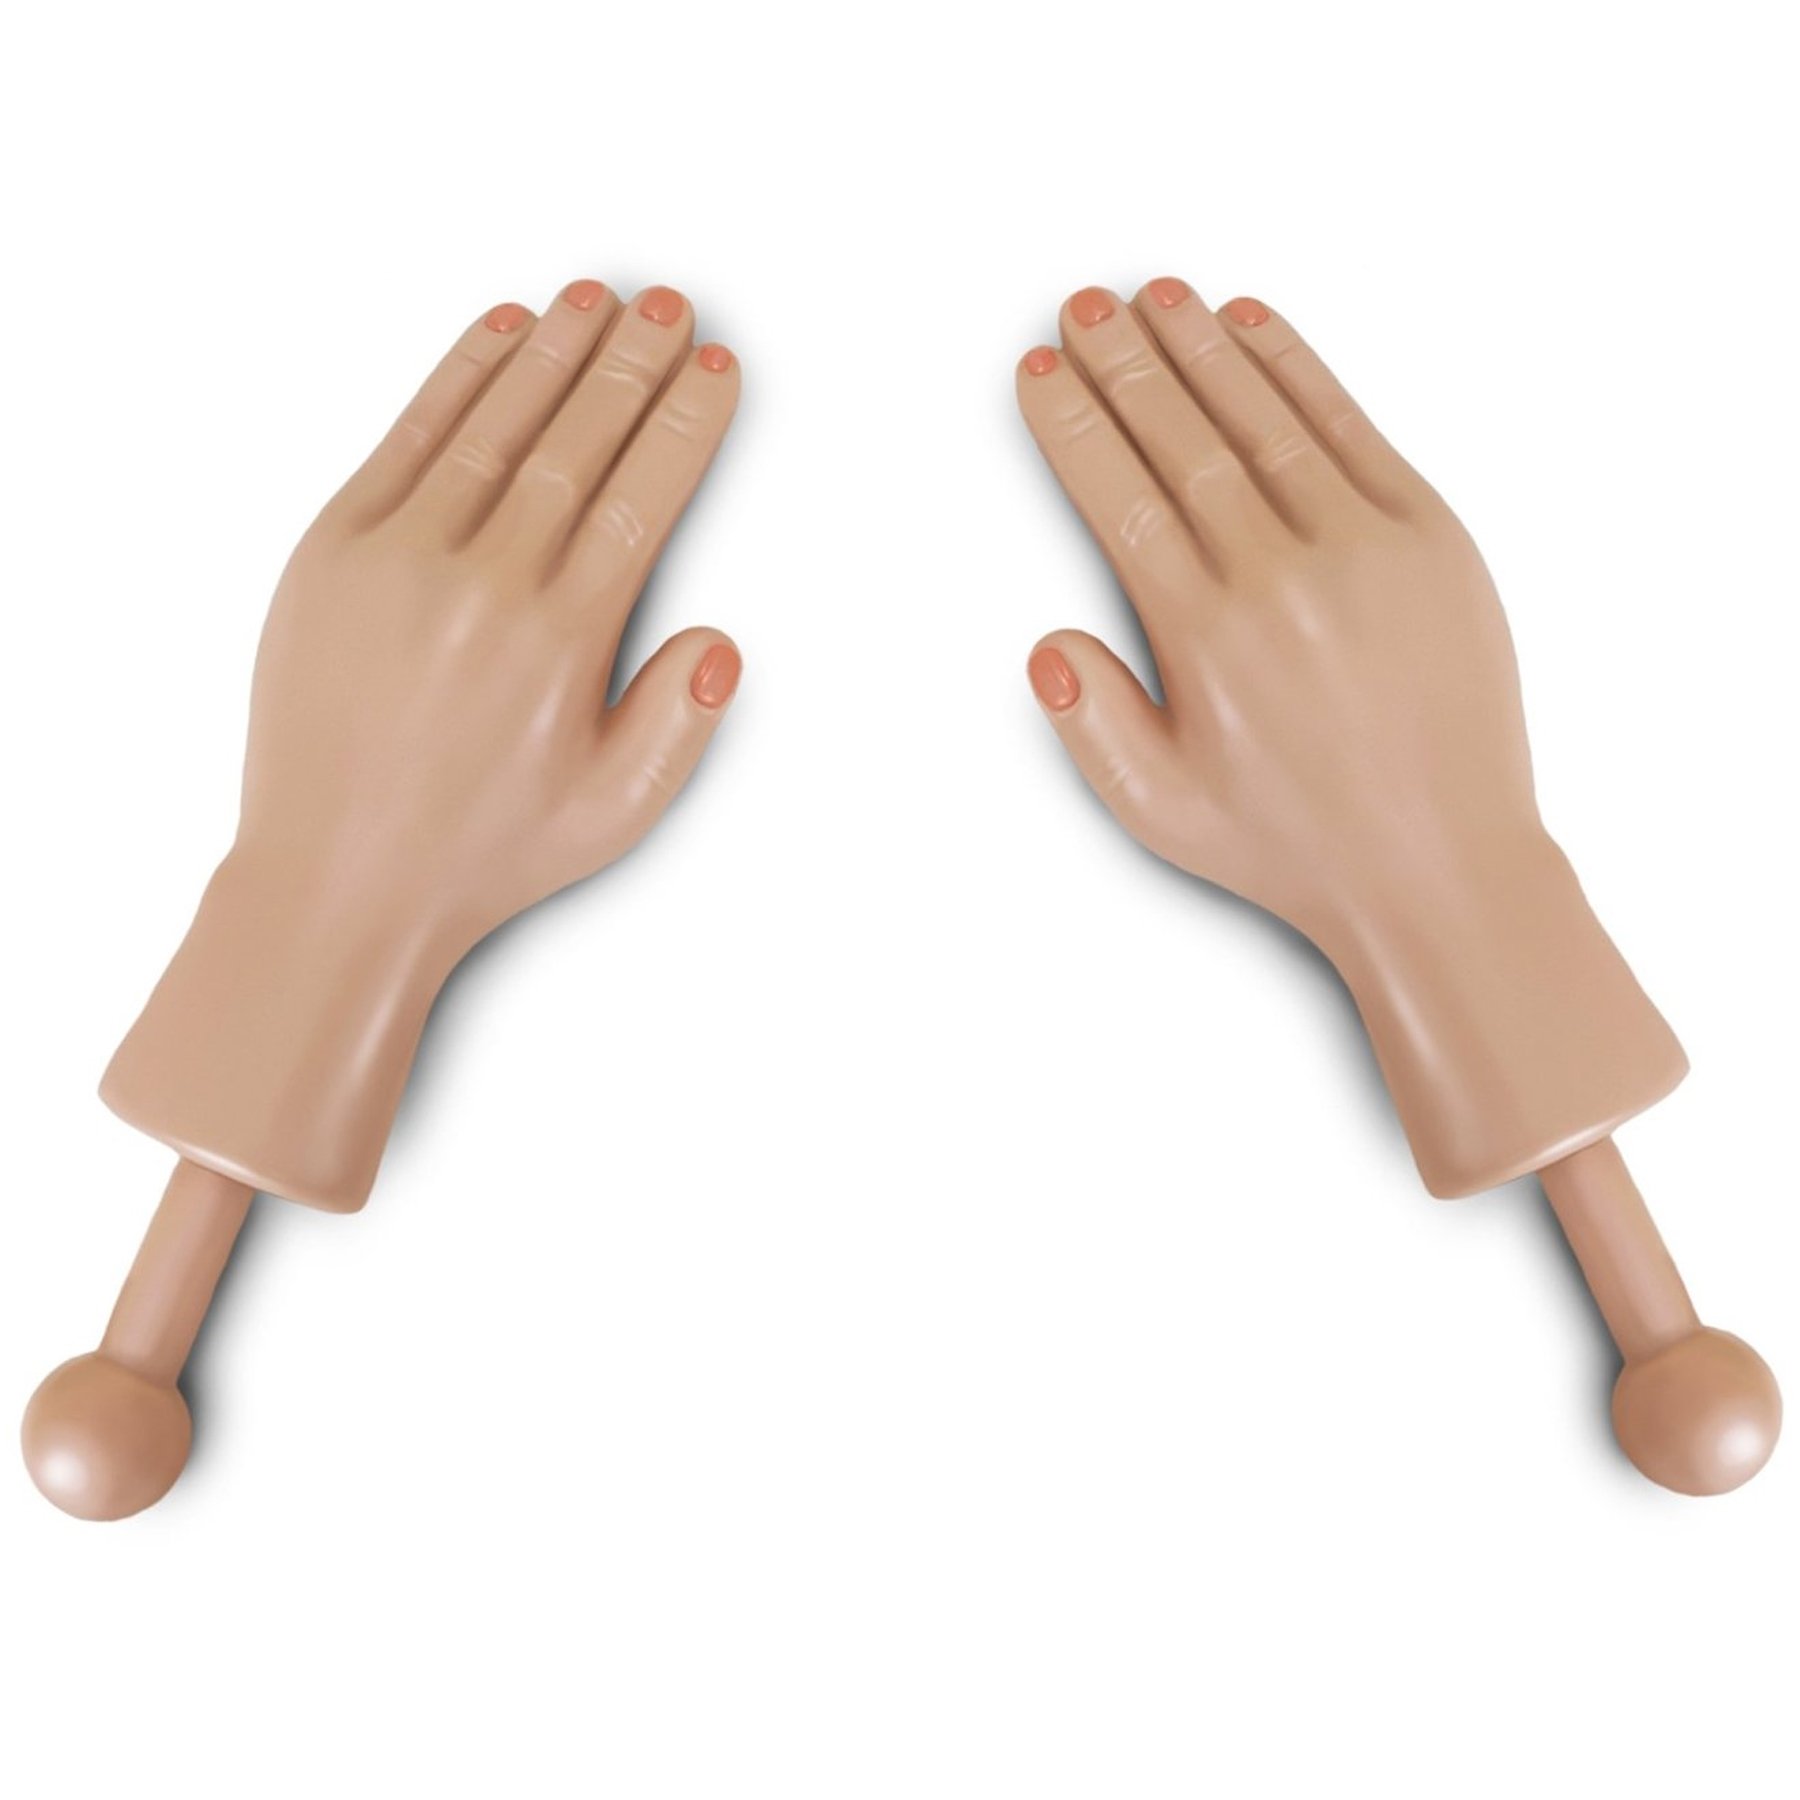 BigMouth Inc. Tiny – Hilarious Realistic Looking 3” Plastic Hands for Costumes and Pranks, Tricks to Keep Up Your Sleeve, Little Hands Toys with Handles - Funny Gift Idea for All Ages